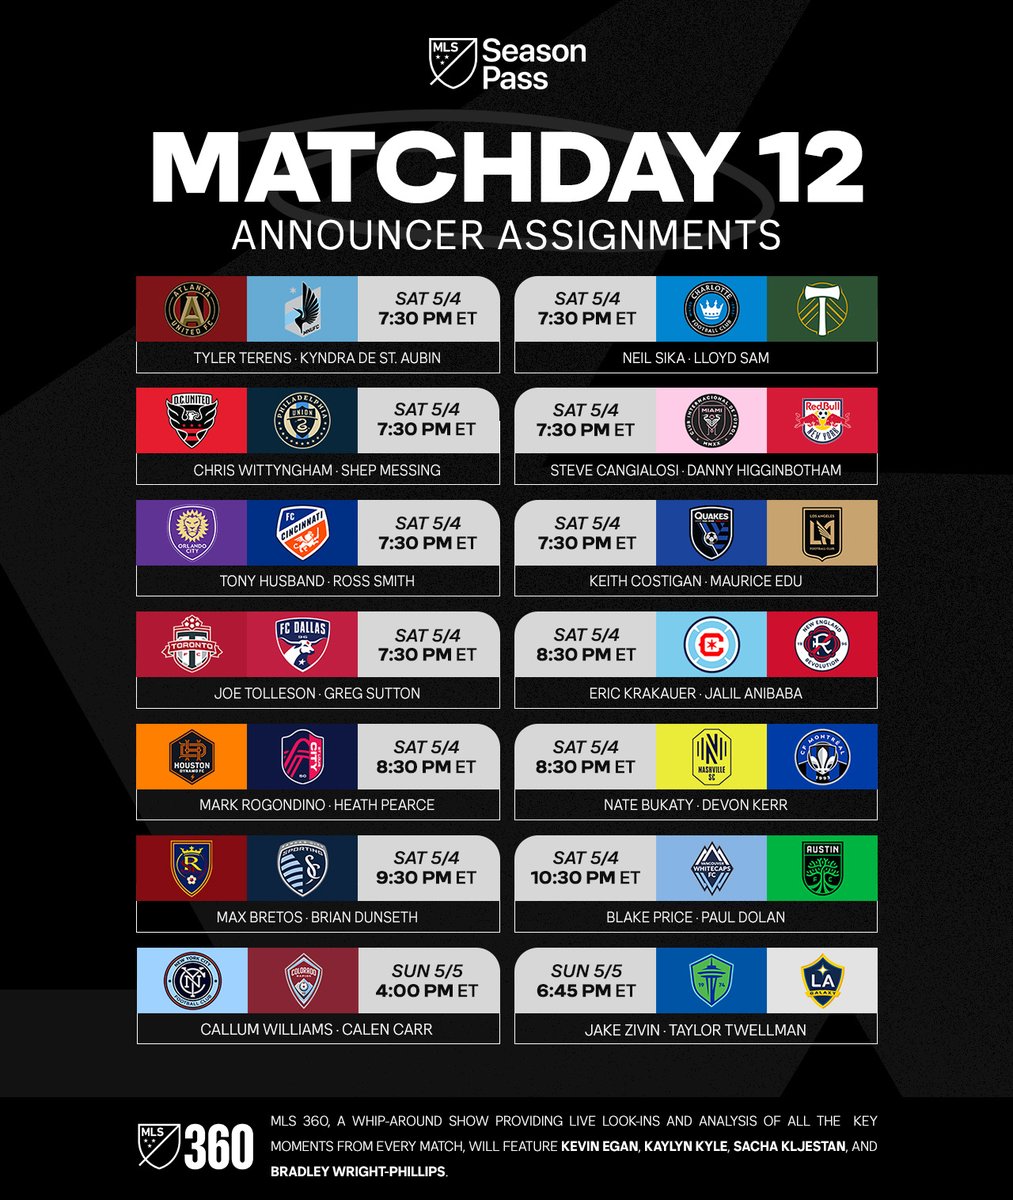 Below is the MLS Season Pass broadcast schedule for Matchday 12, including English-language commentators for each match with the play-by-play talent listed first, followed by the match analyst.